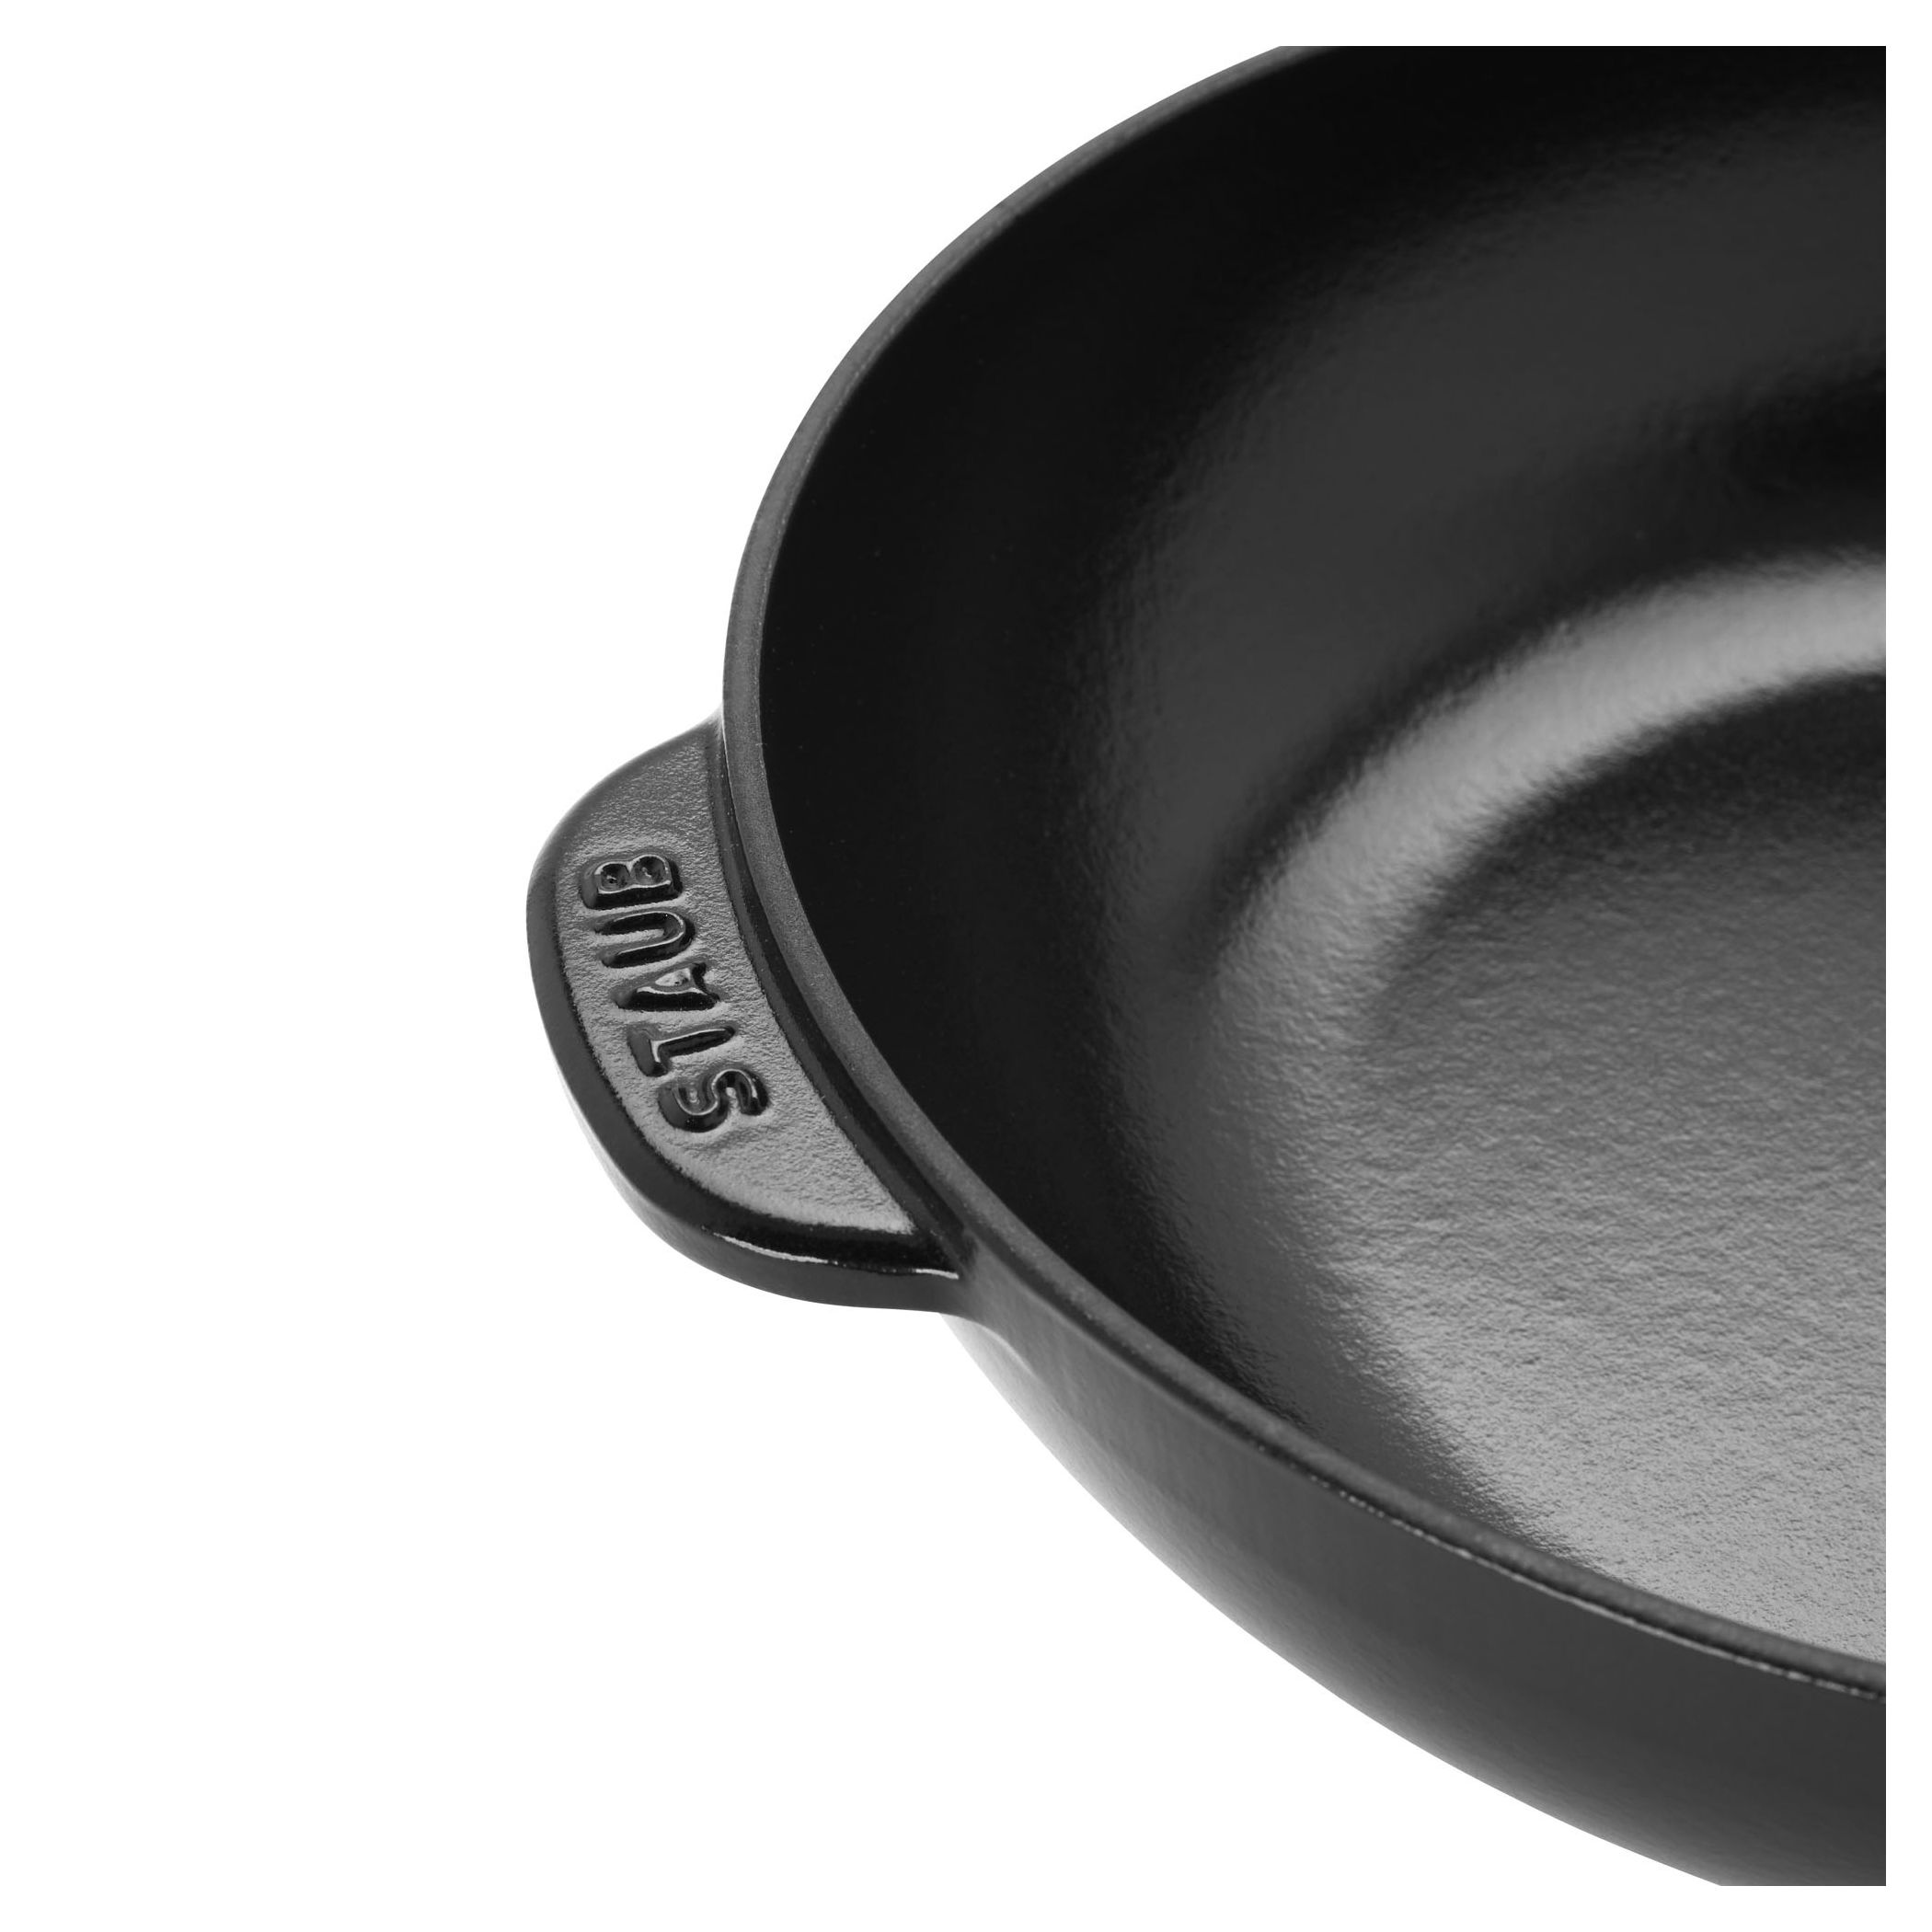 Staub Cast Iron - Fry Pans/ Skillets 10-inch, Daily pan with glass lid,  graphite grey